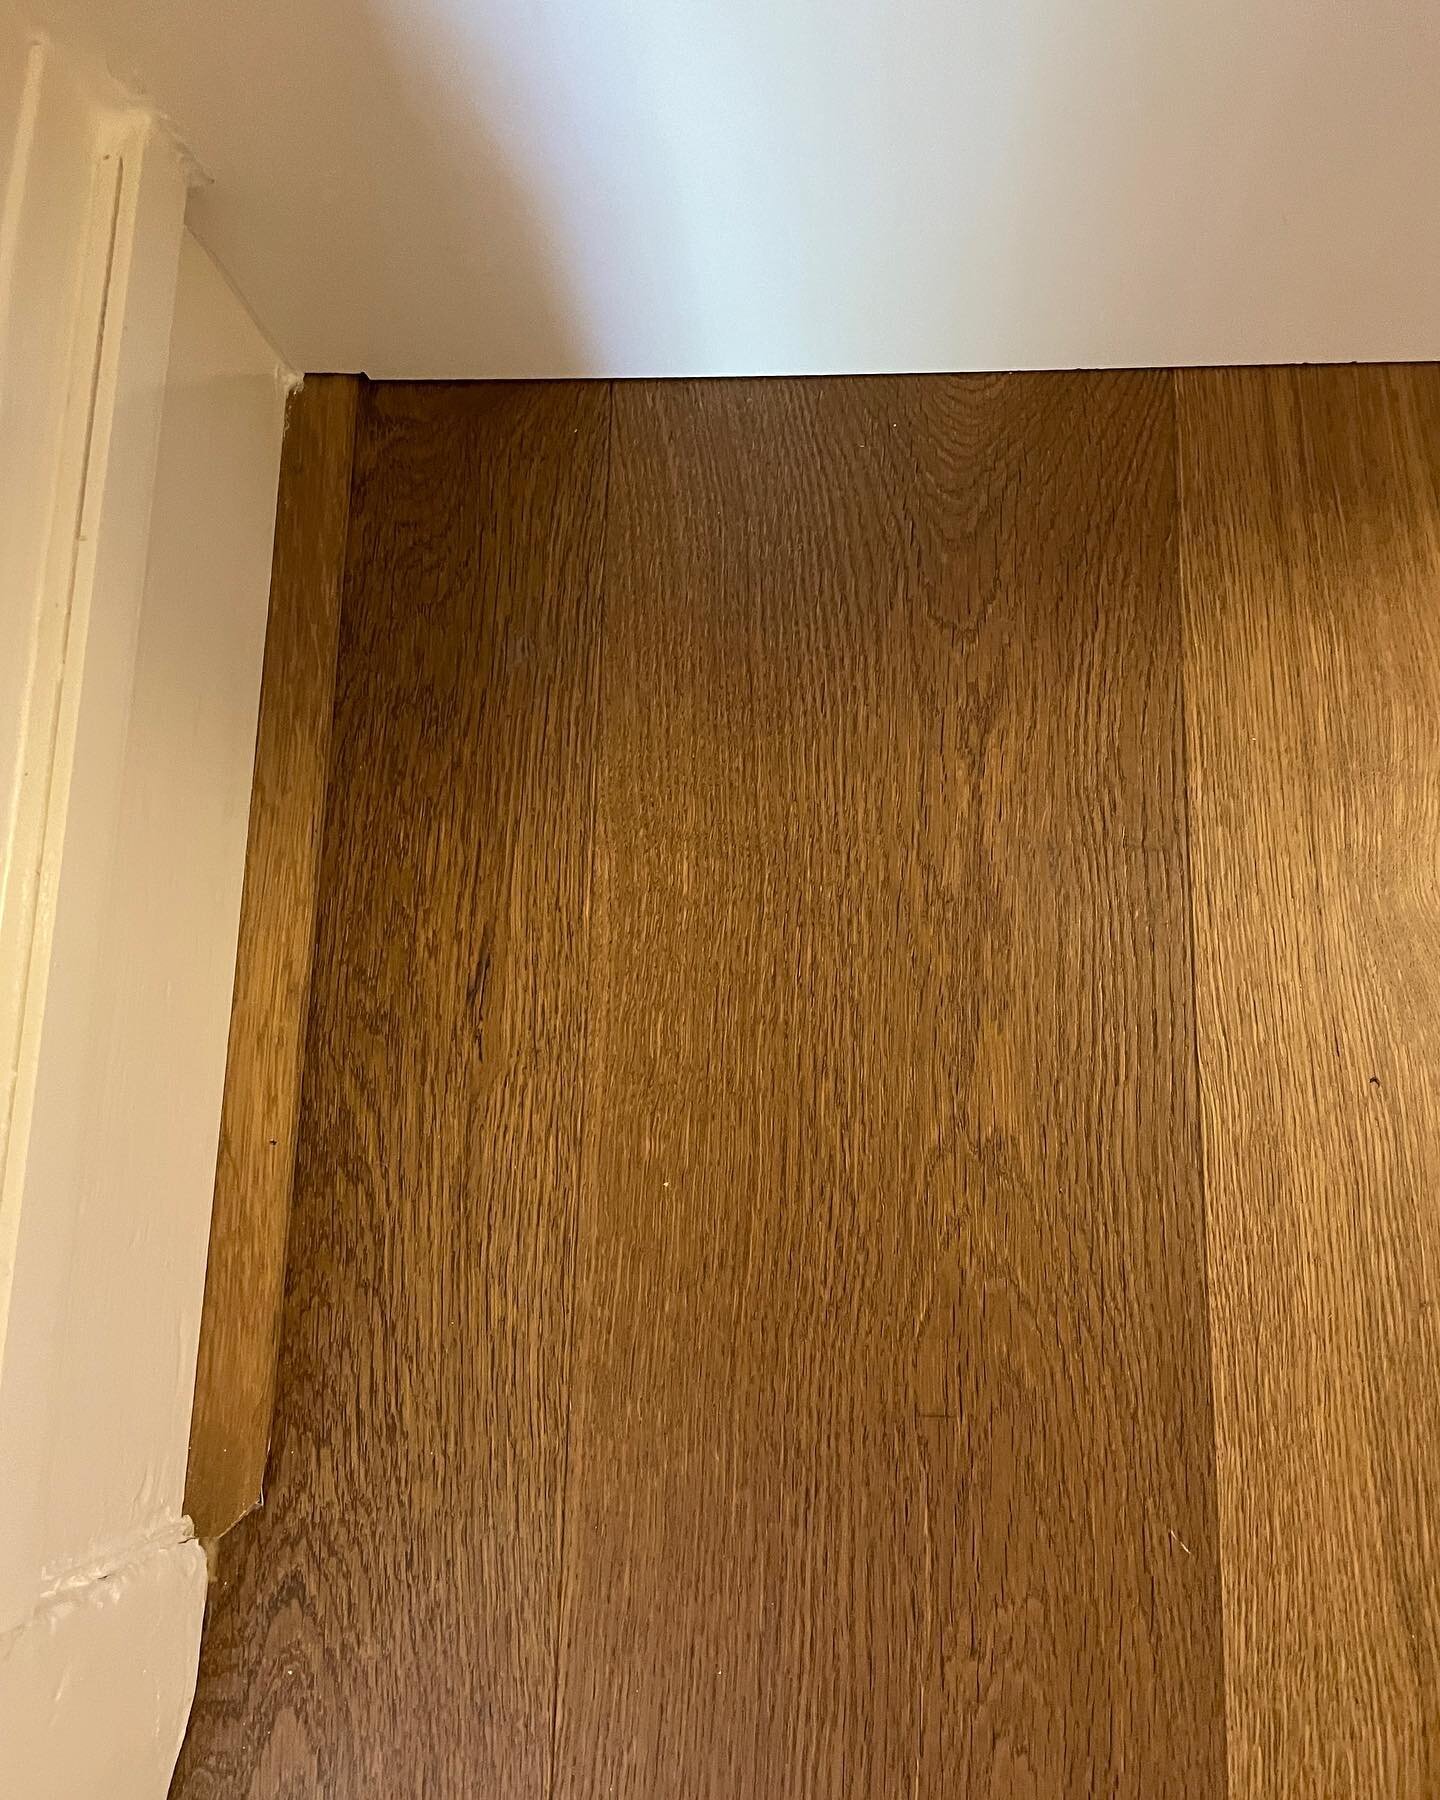 QUICK-FIX | can you spot where we&rsquo;ve patched a deep dent in this engineered oak? We&rsquo;ve used the QuickStep Repair Kit which contains a variety of coloured waxes that you can mix to achieve the perfect match. A handy kit that we keep in our